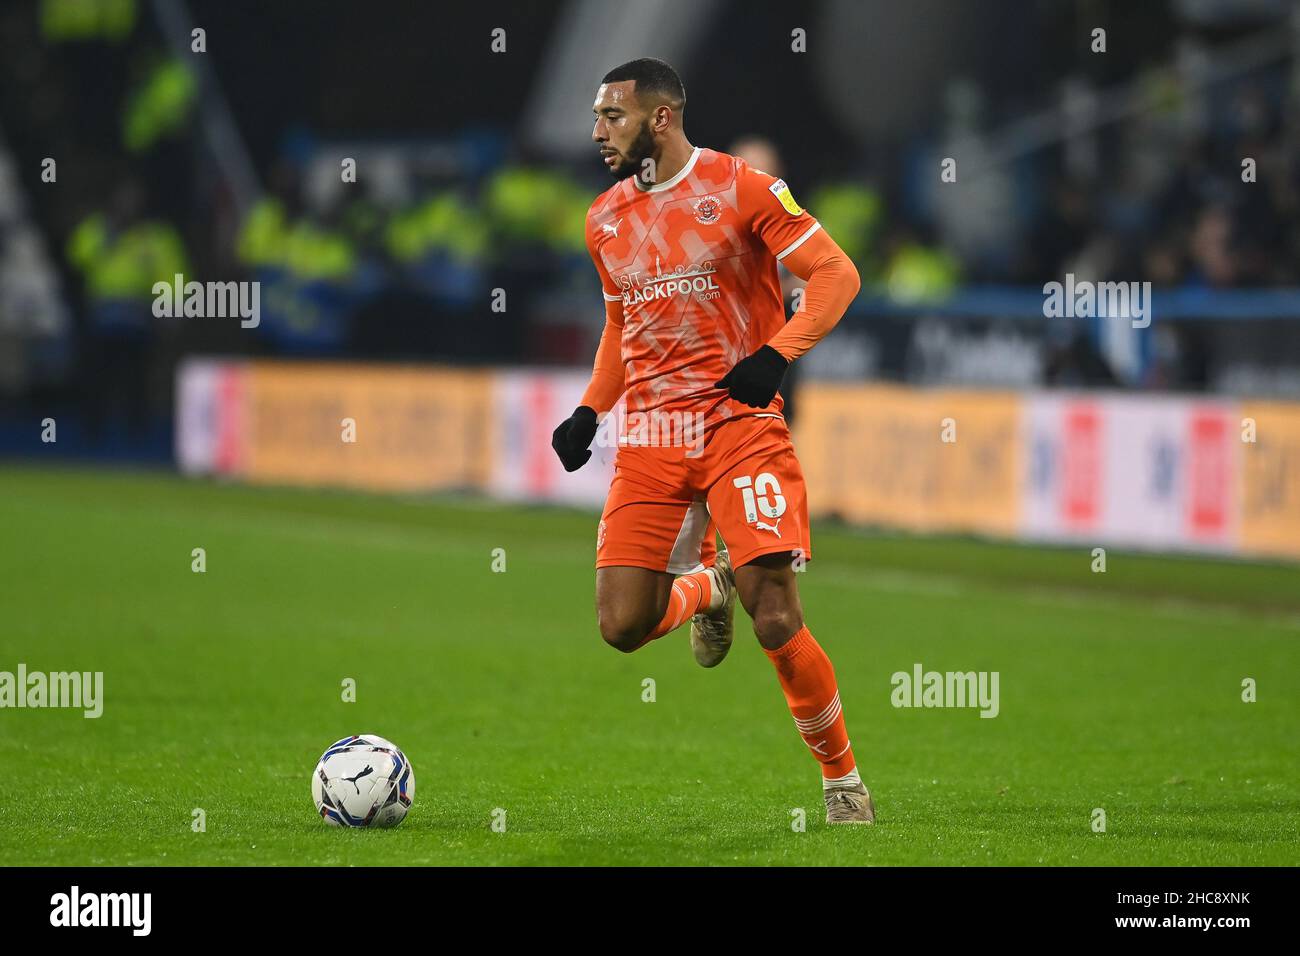 Keshi Anderson #10 of Blackpool makes a break with the ball in ,  on 12/26/2021. (Photo by Craig Thomas/News Images/Sipa USA) Stock Photo